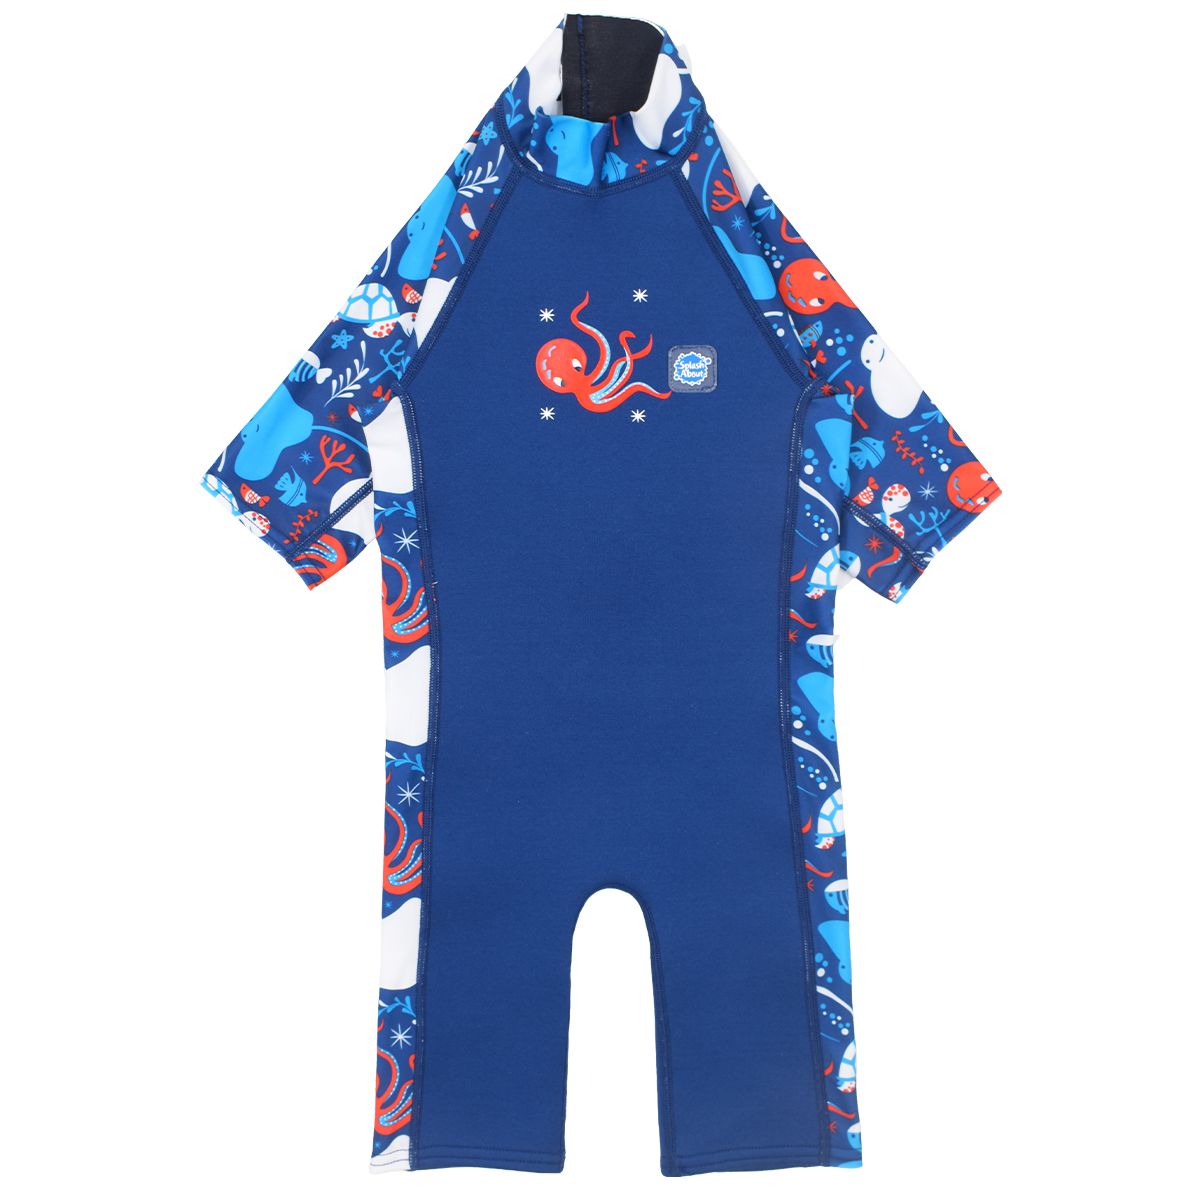 One piece UV sun and sea wetsuit for toddlers in navy blue. Sea life themed print including turtles, octopus, fish, stingray and more on sleeves, side panels, neck and chest. Front.